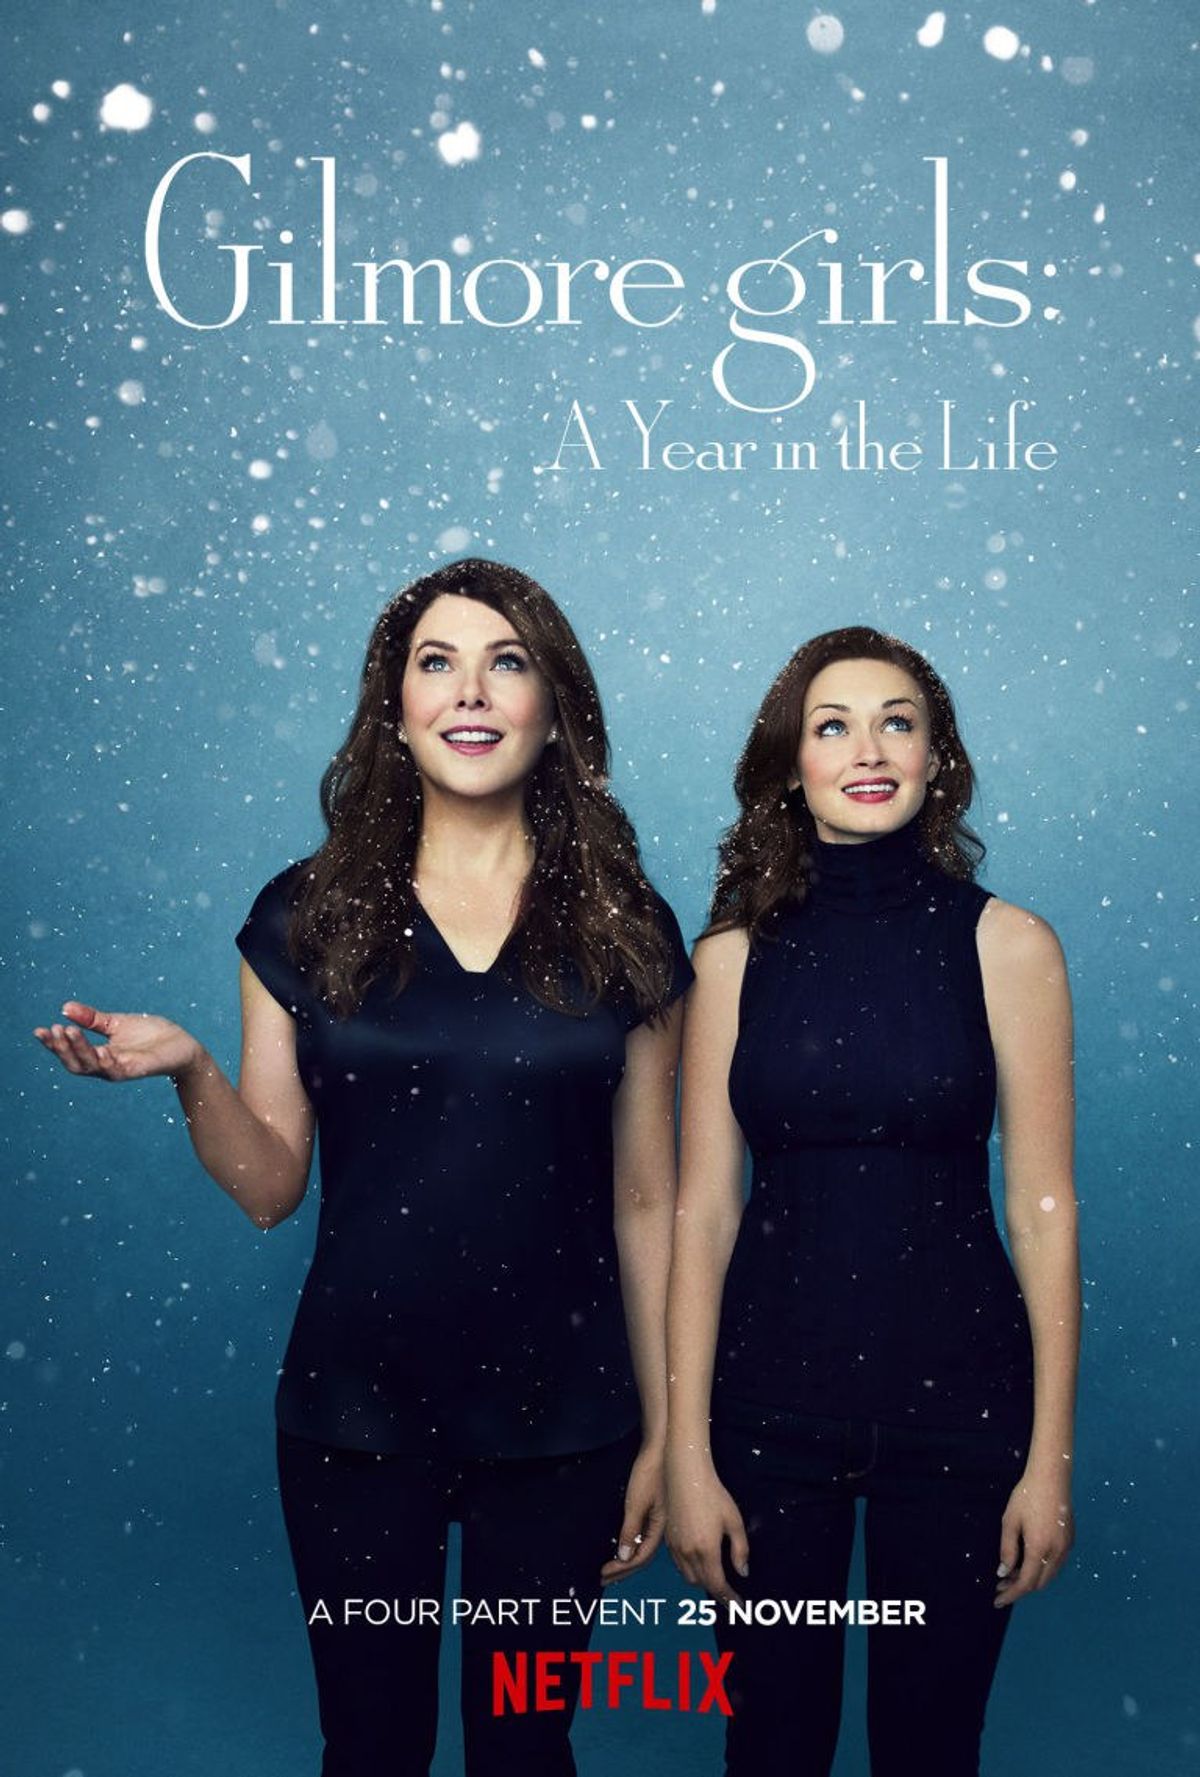 89 Thoughts I Had While Watching Gilmore Girls A Year In the Life